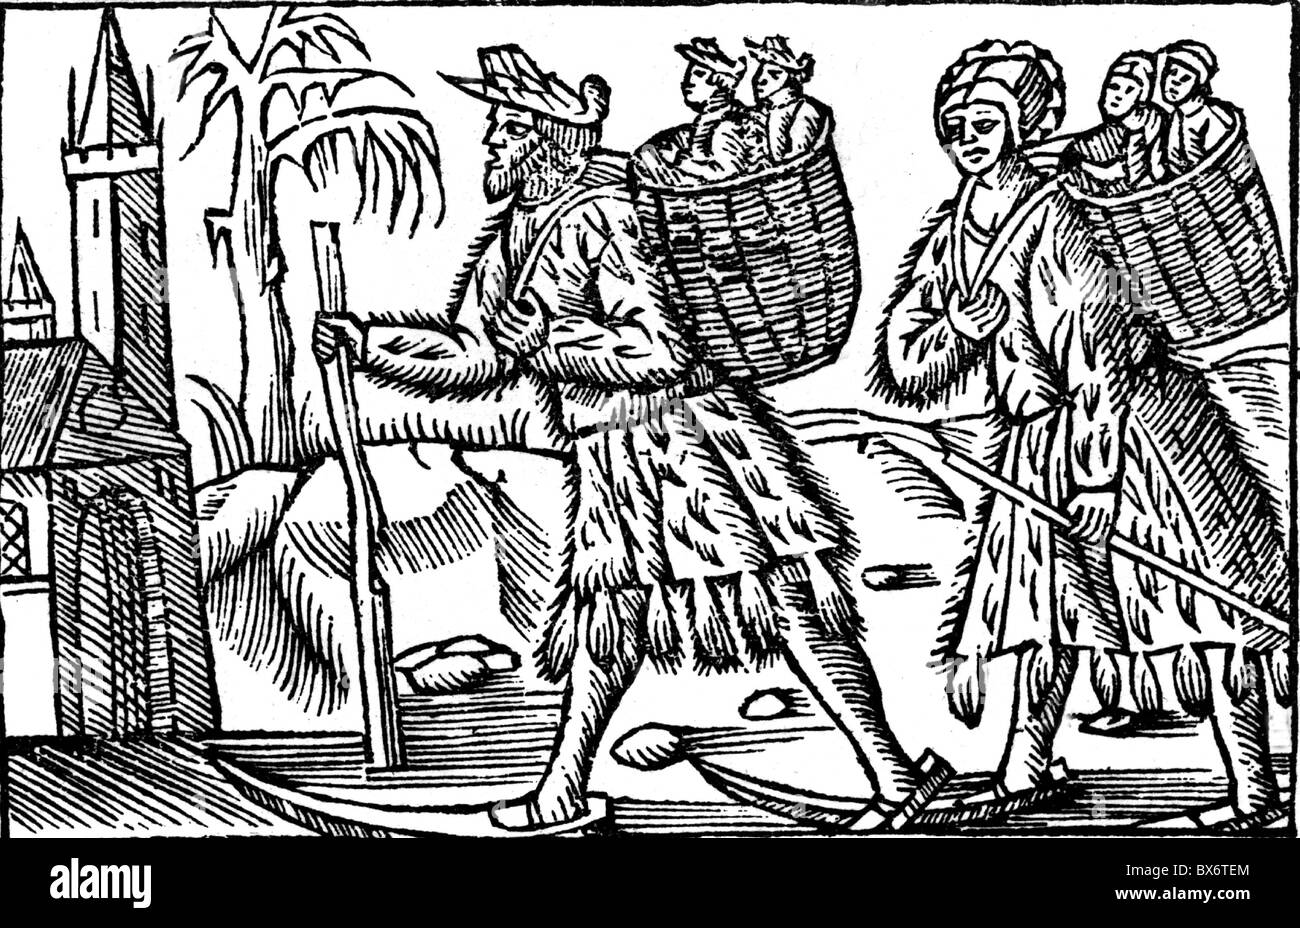 sports, winter sports, snow shoes, Nordic skier at 16th century, after Olaus Magnus / Historia de gentibus septentrionalibus, Rome, 1555, Additional-Rights-Clearences-Not Available Stock Photo